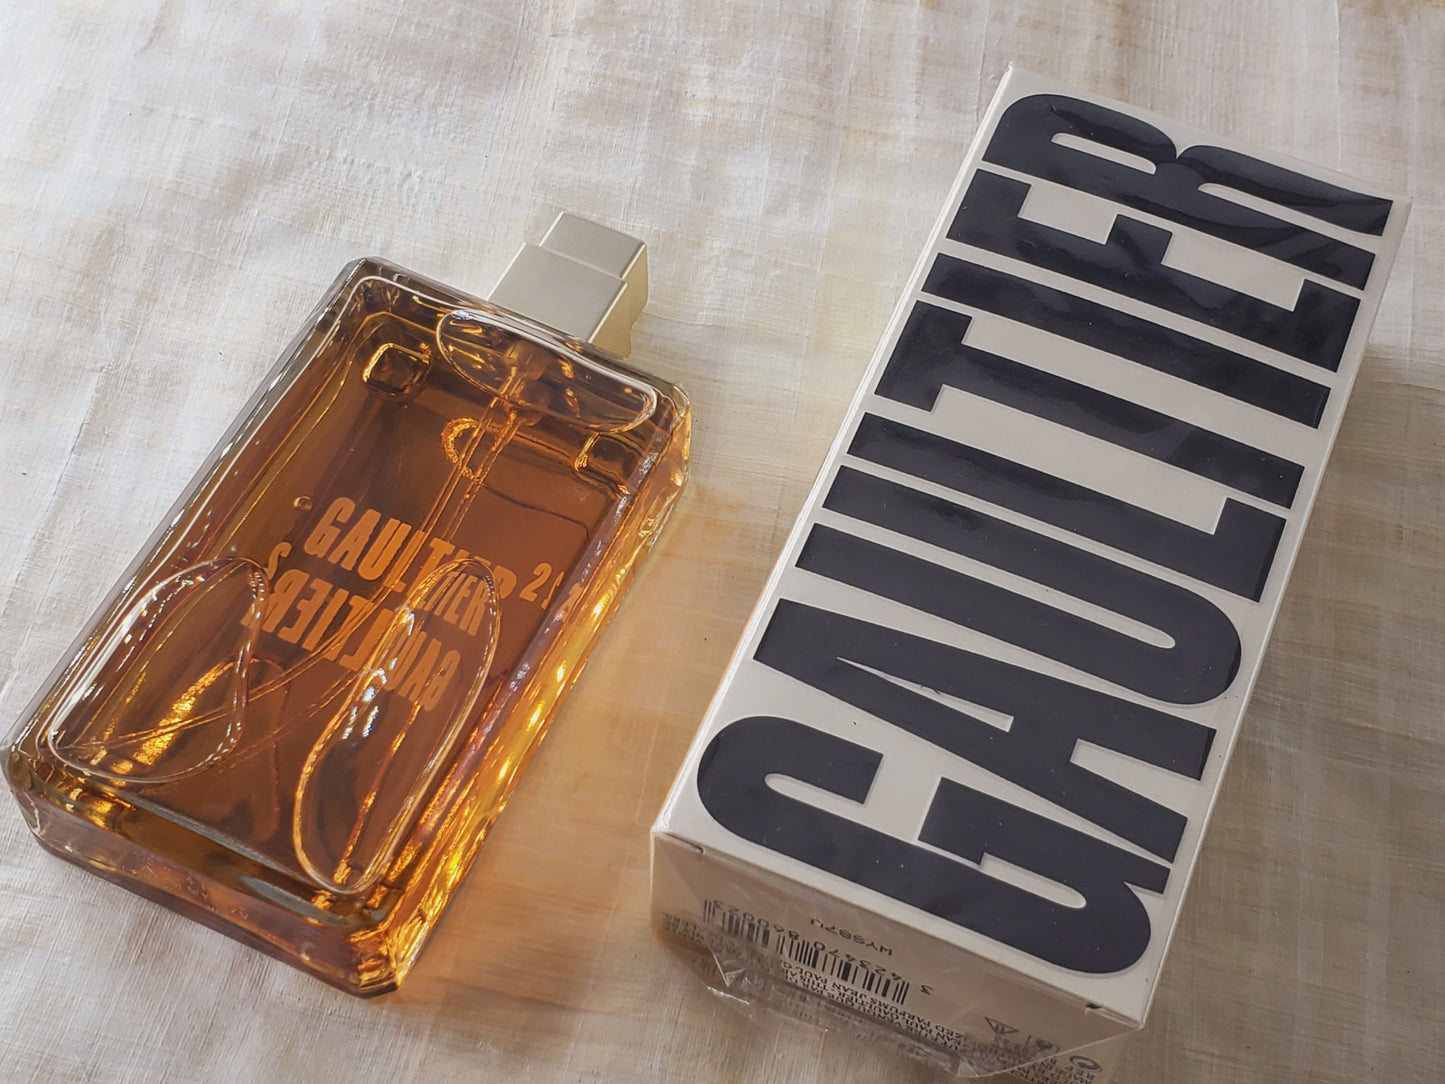 Gaultier 2 Jean Paul Gaultier for women and men EDP Spray 120 ml 4 oz, Vintage, Very Rare, Hard to find